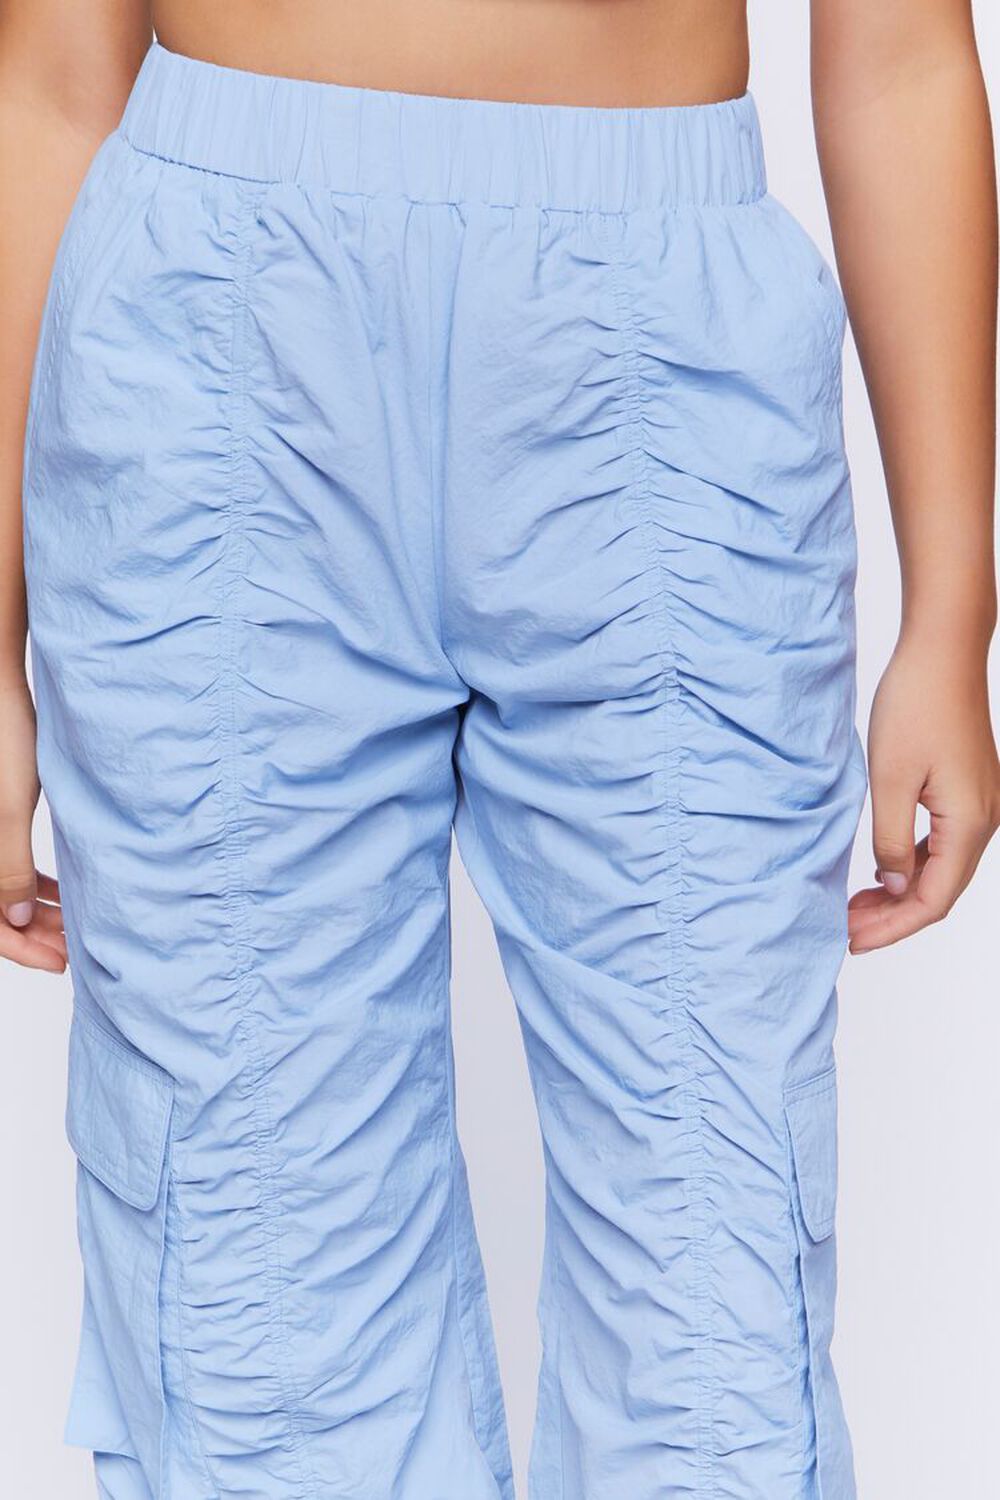 Forever 21 Girls Ruched Cargo Pants (Kids) in Blue, 11/12